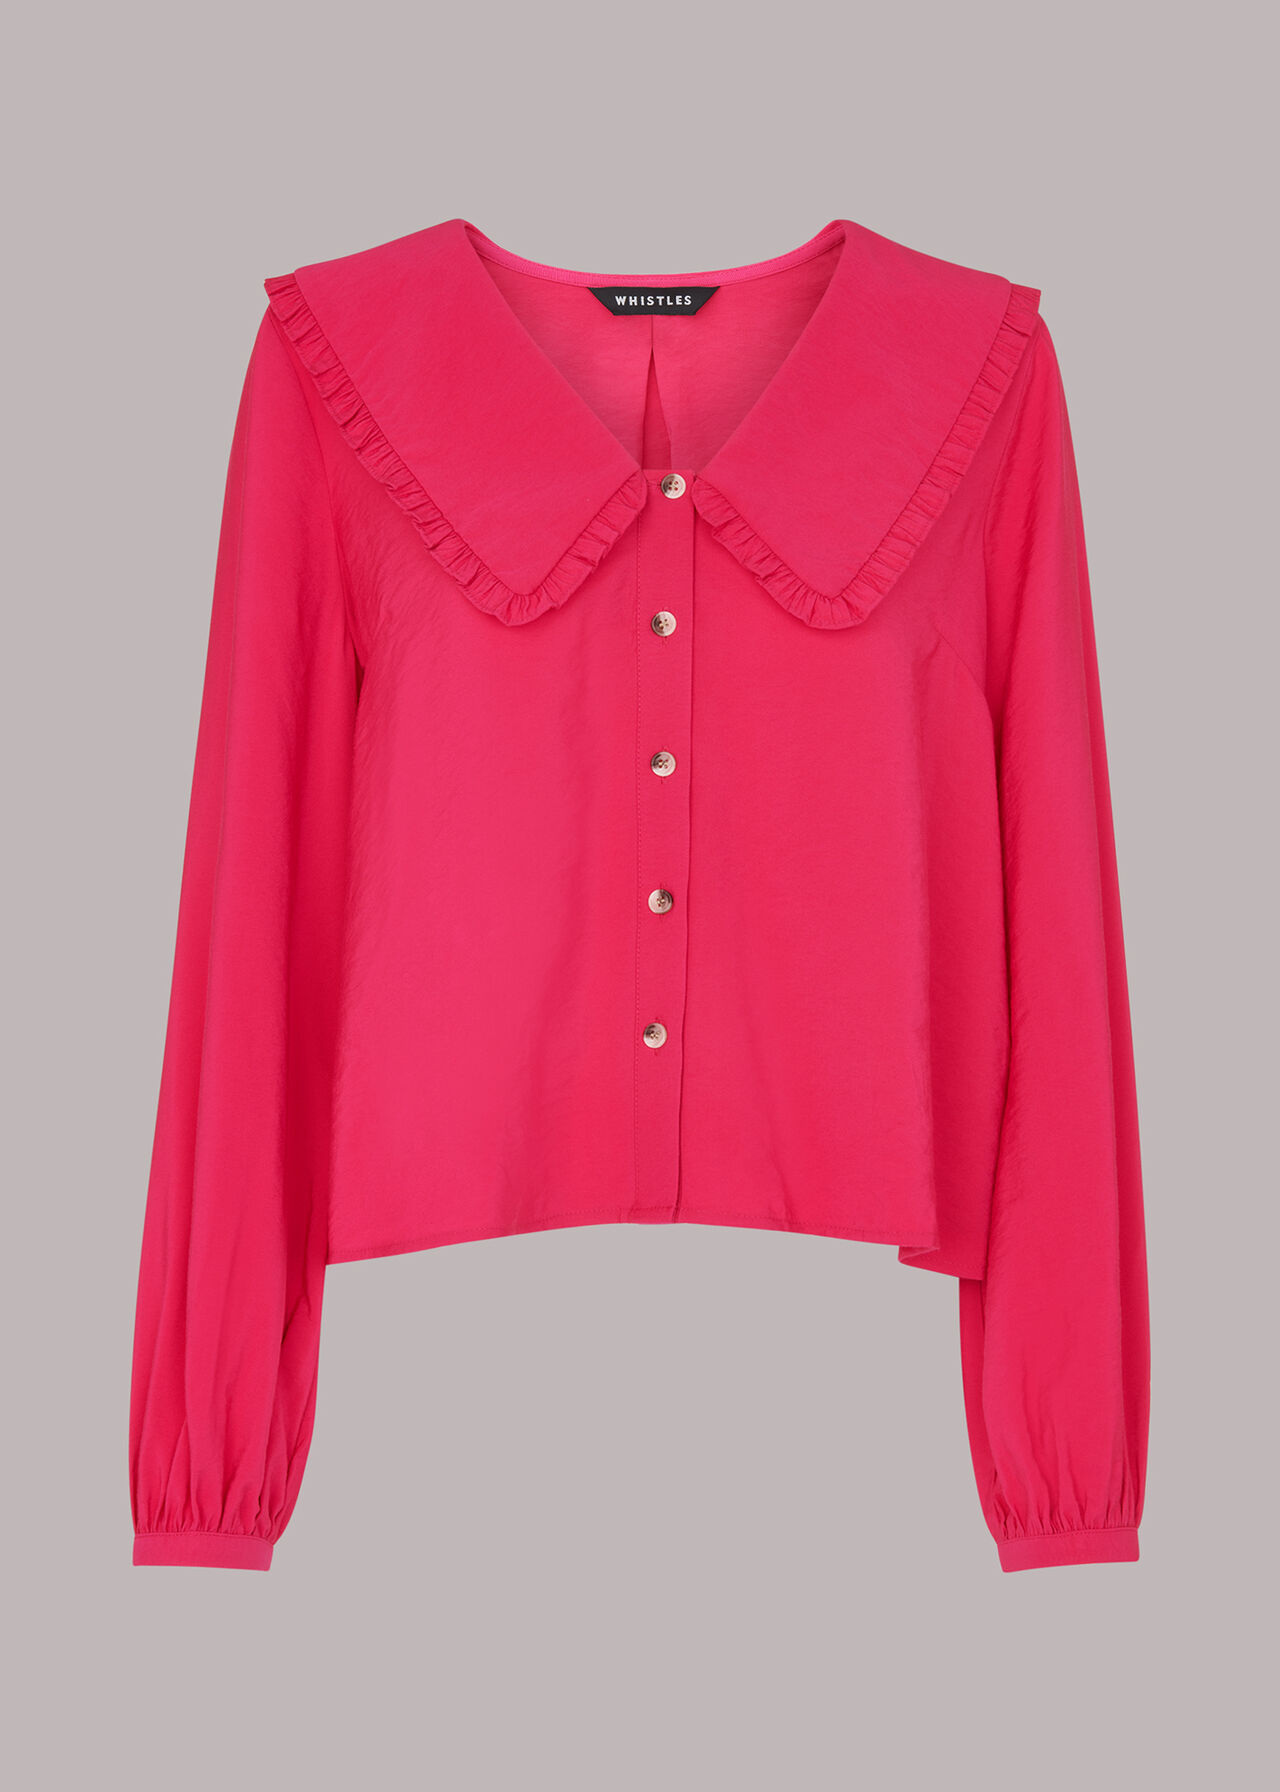 Pink Oversized Collar Top | WHISTLES